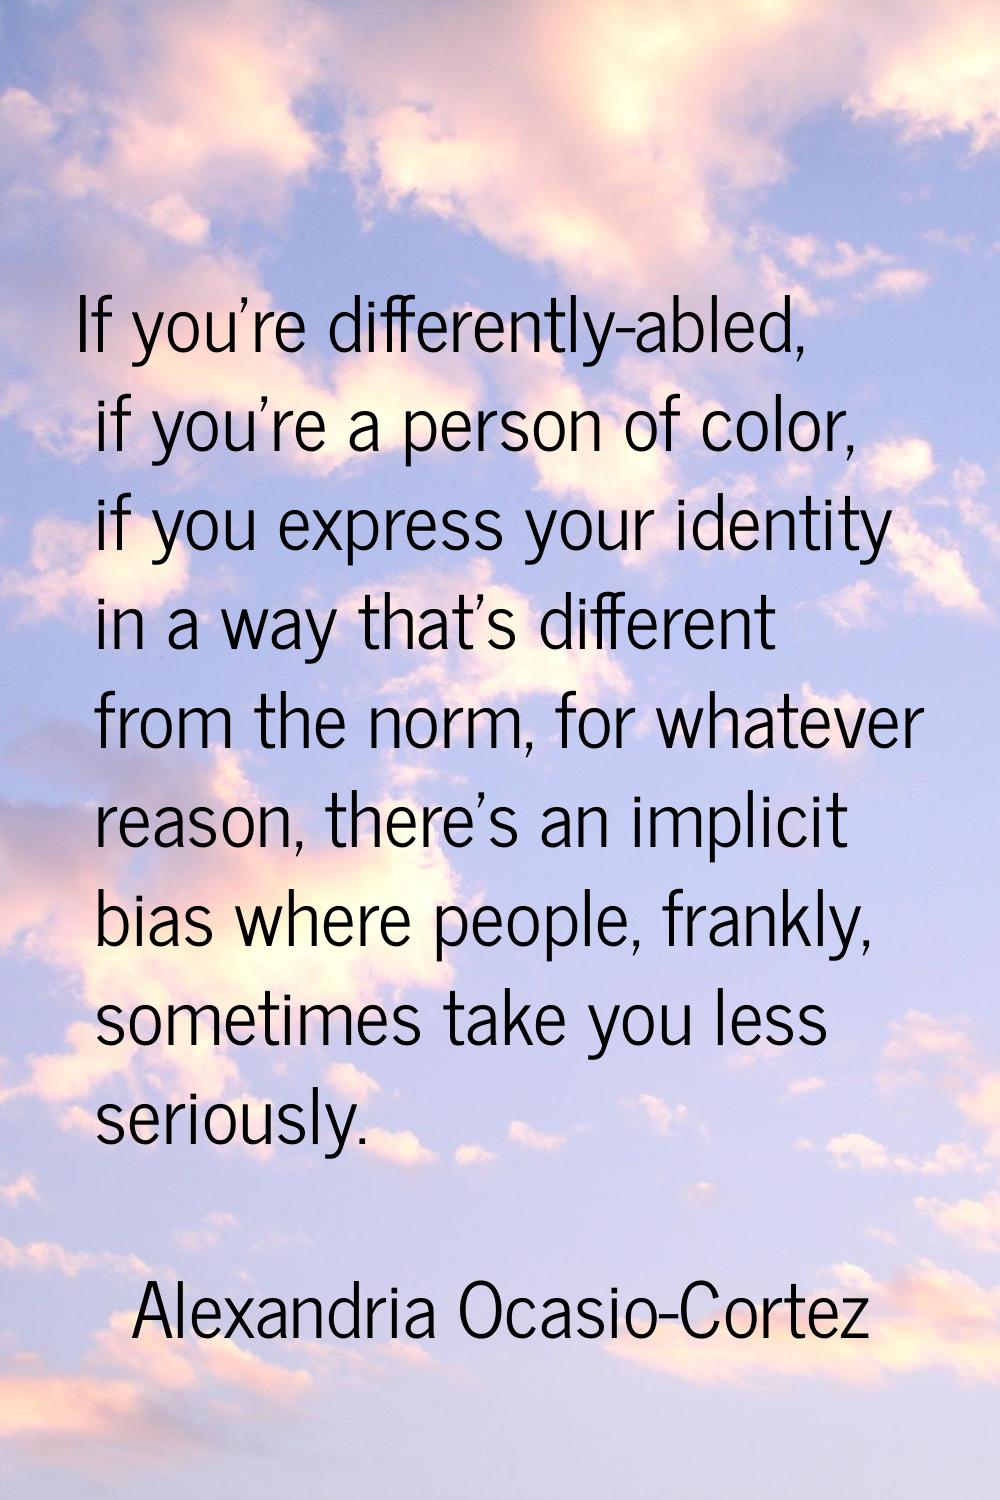 If you're differently-abled, if you're a person of color, if you express your identity in a way tha